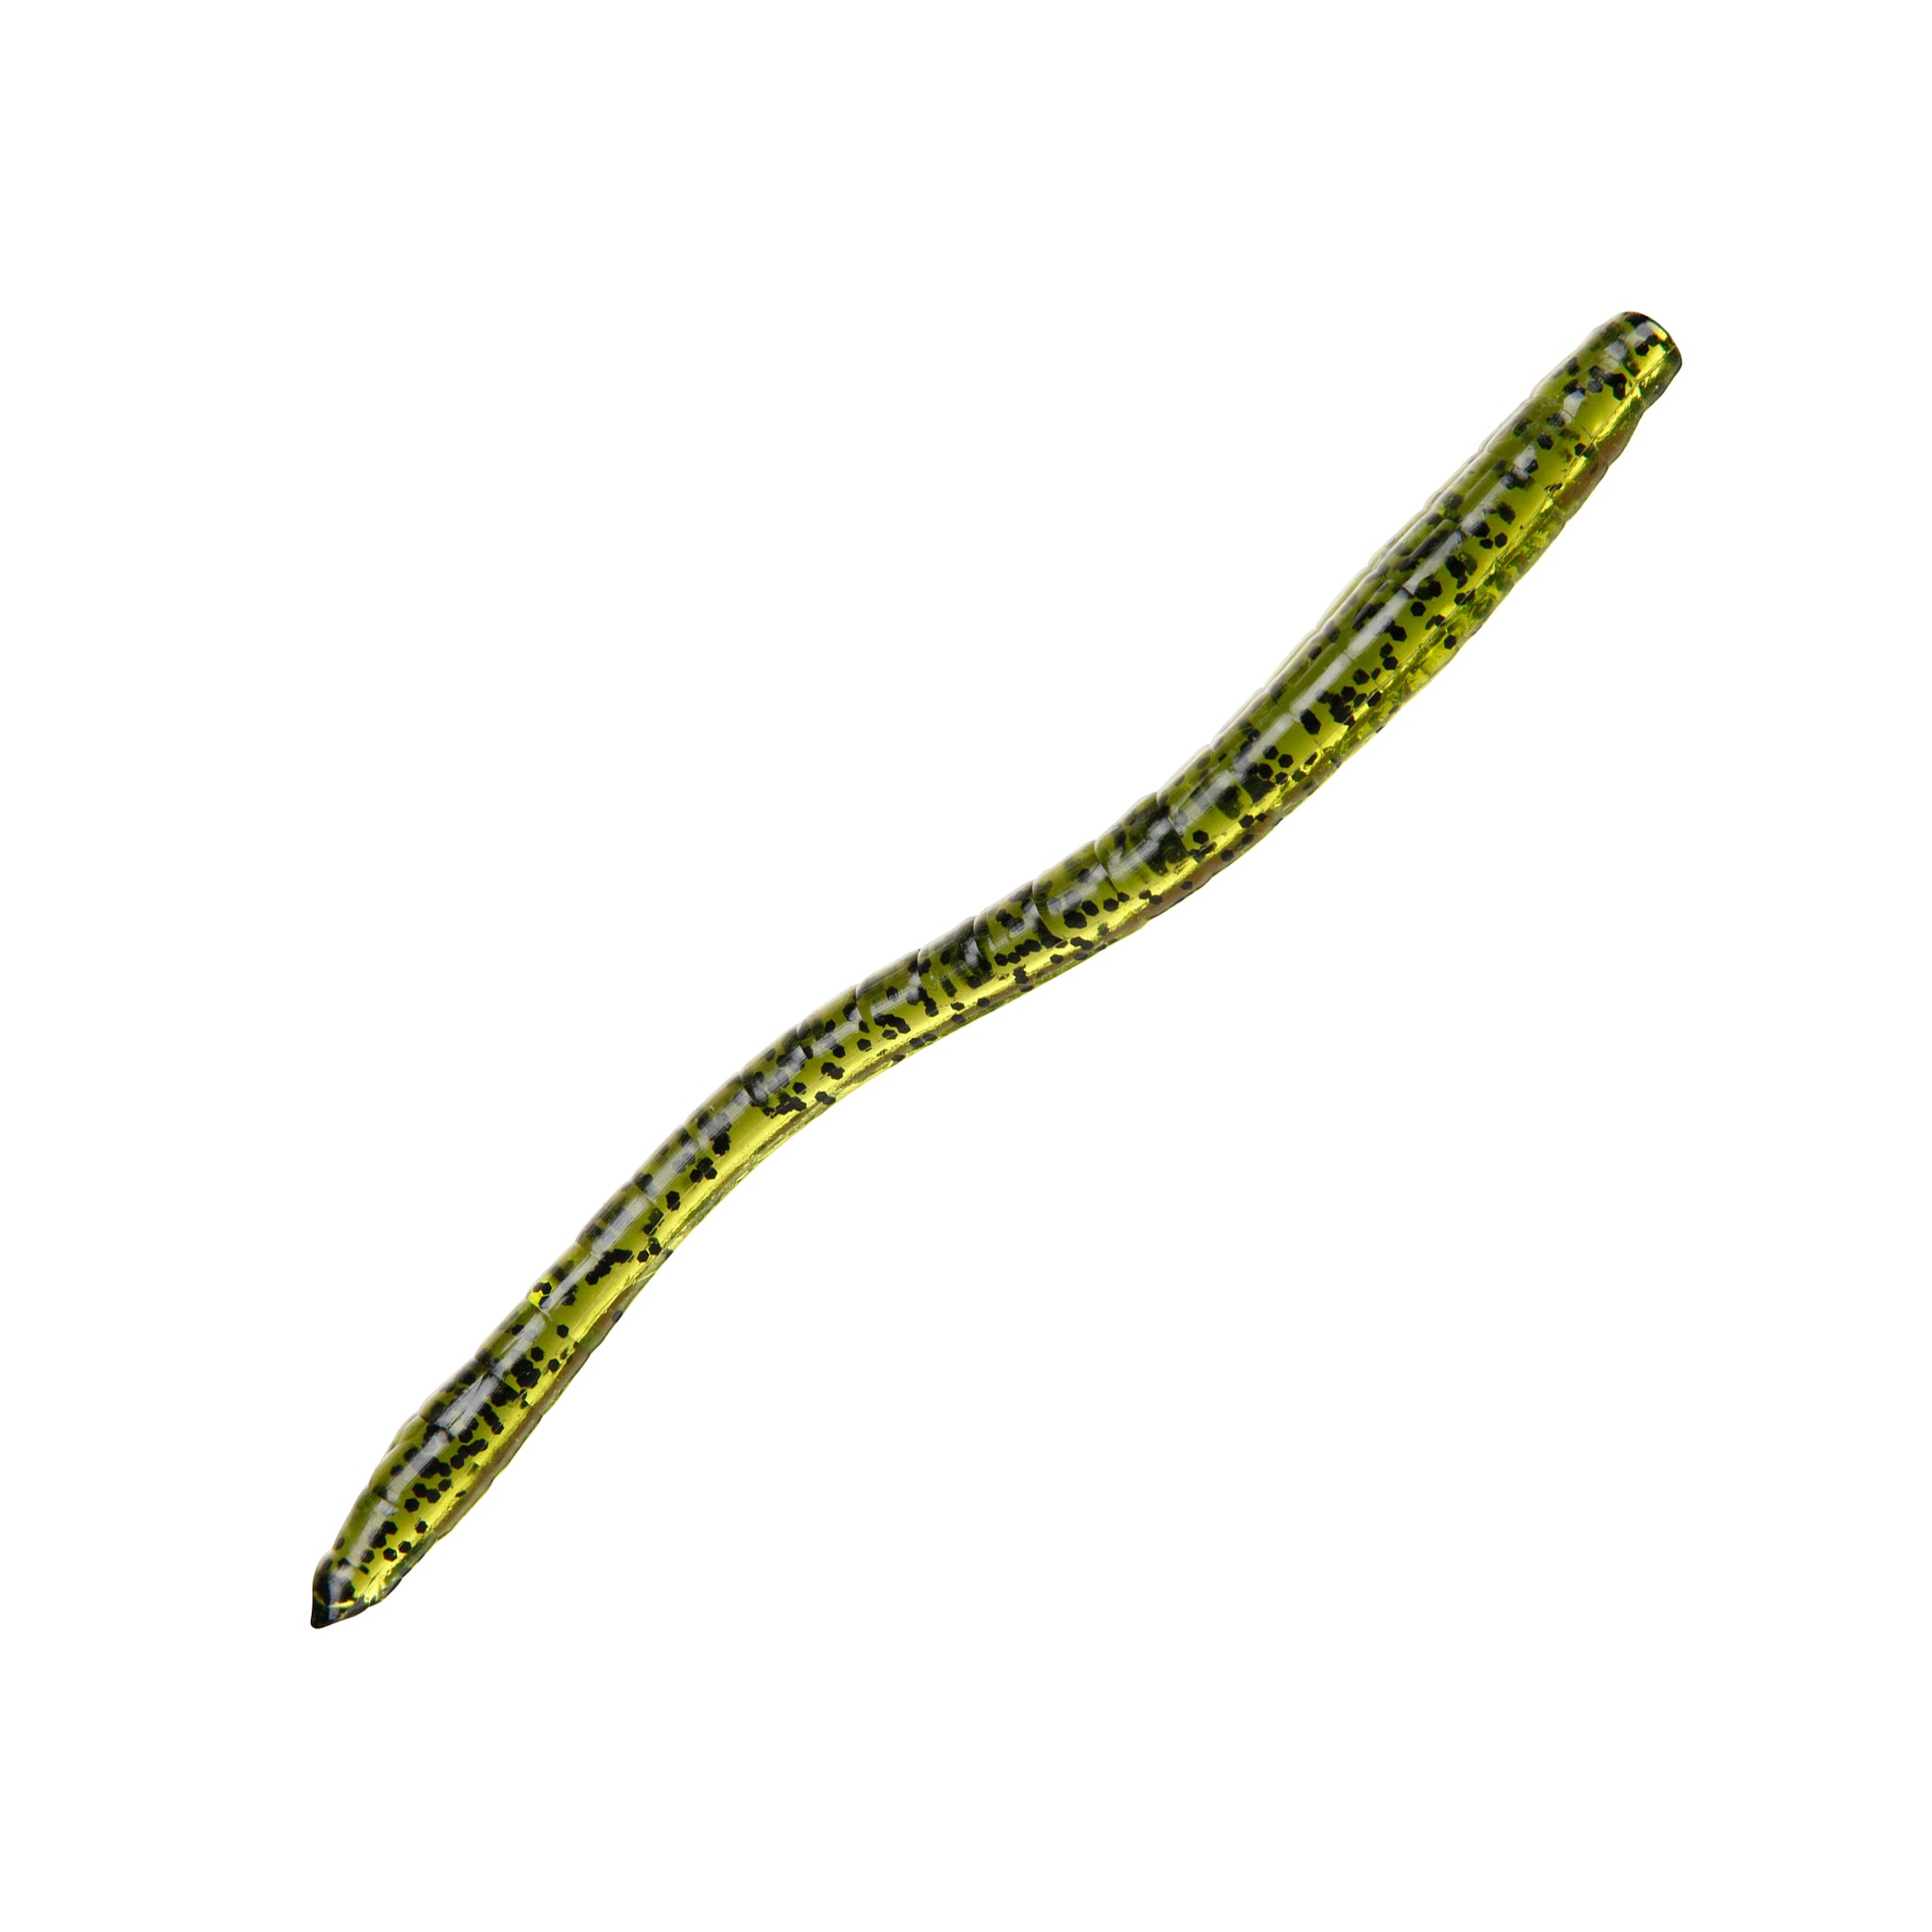 Worms - Florida Fishing Outfitters Tackle Store